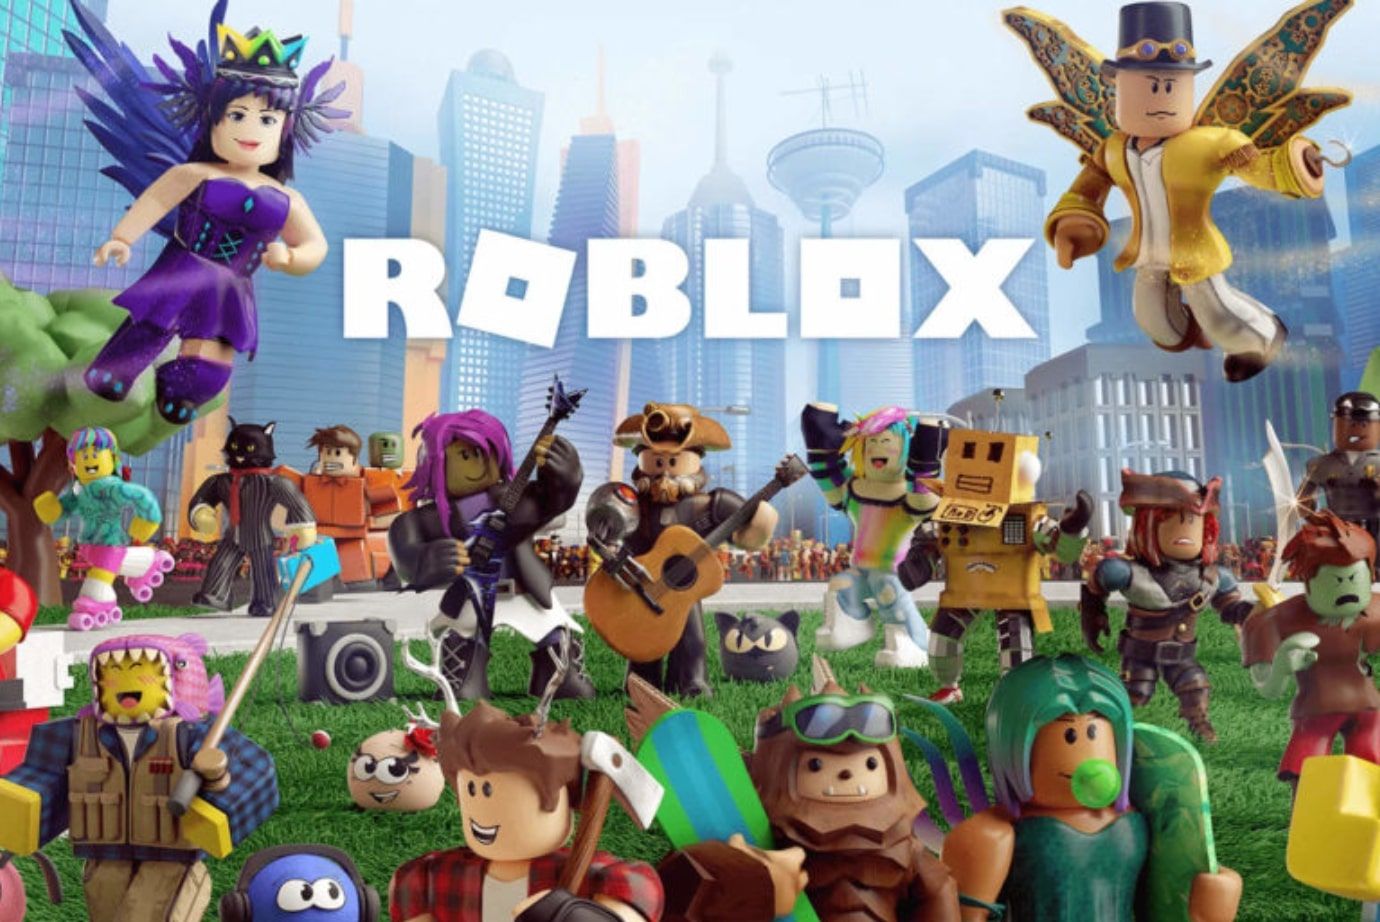 Roblox September 2020 Promo Codes New Cosmetics All Active Codes Backpacks Crystalline Companion More - new roblox pictures